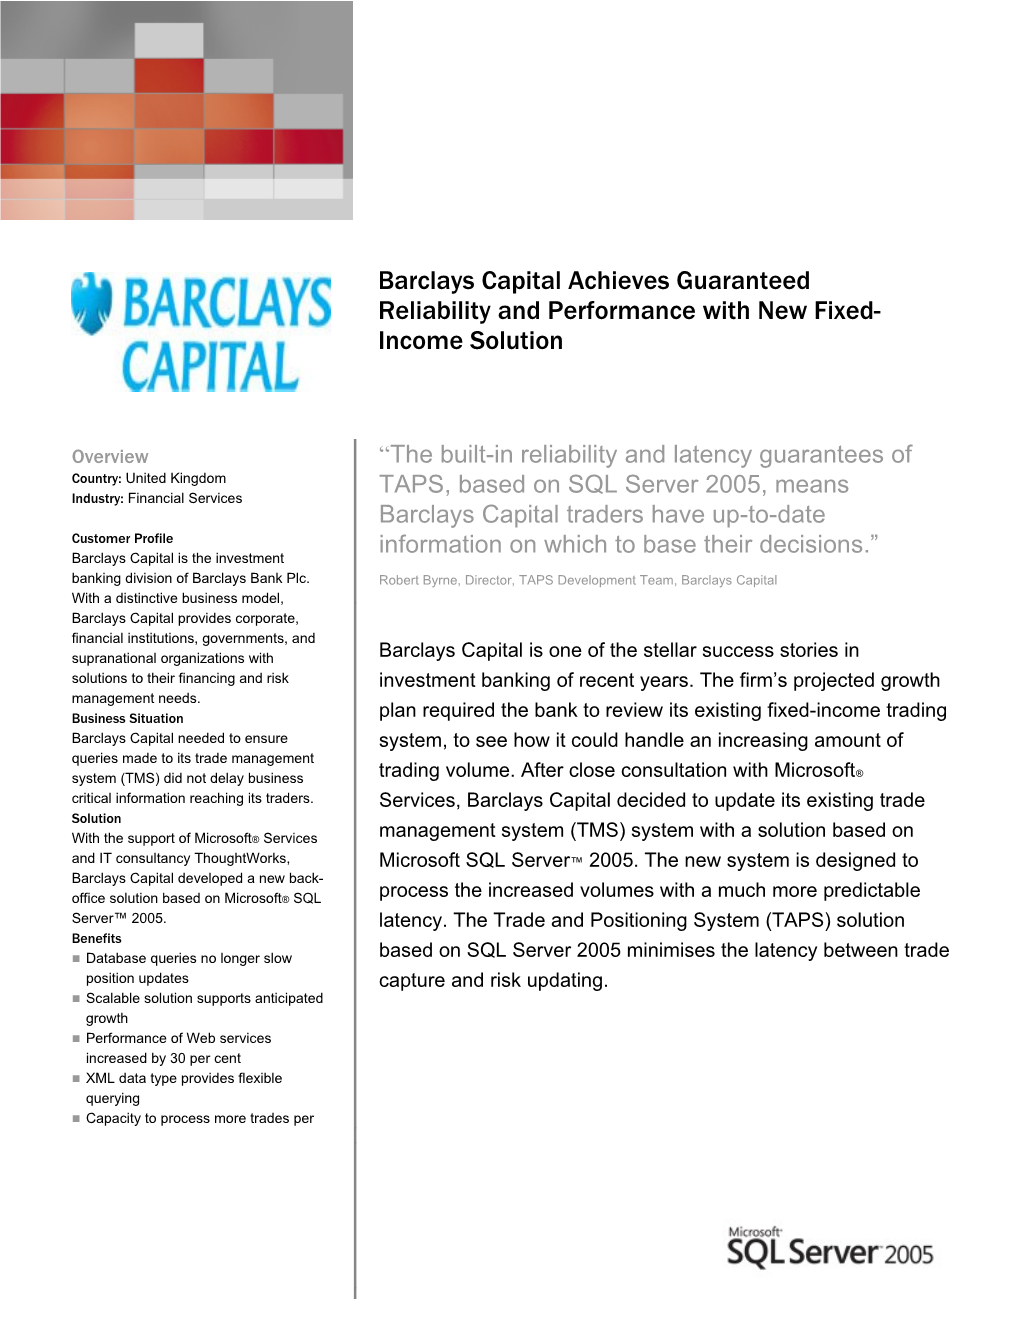 Barclays Capital Achieves Guaranteed Reliability and Performance with New Fixed-Income Solution